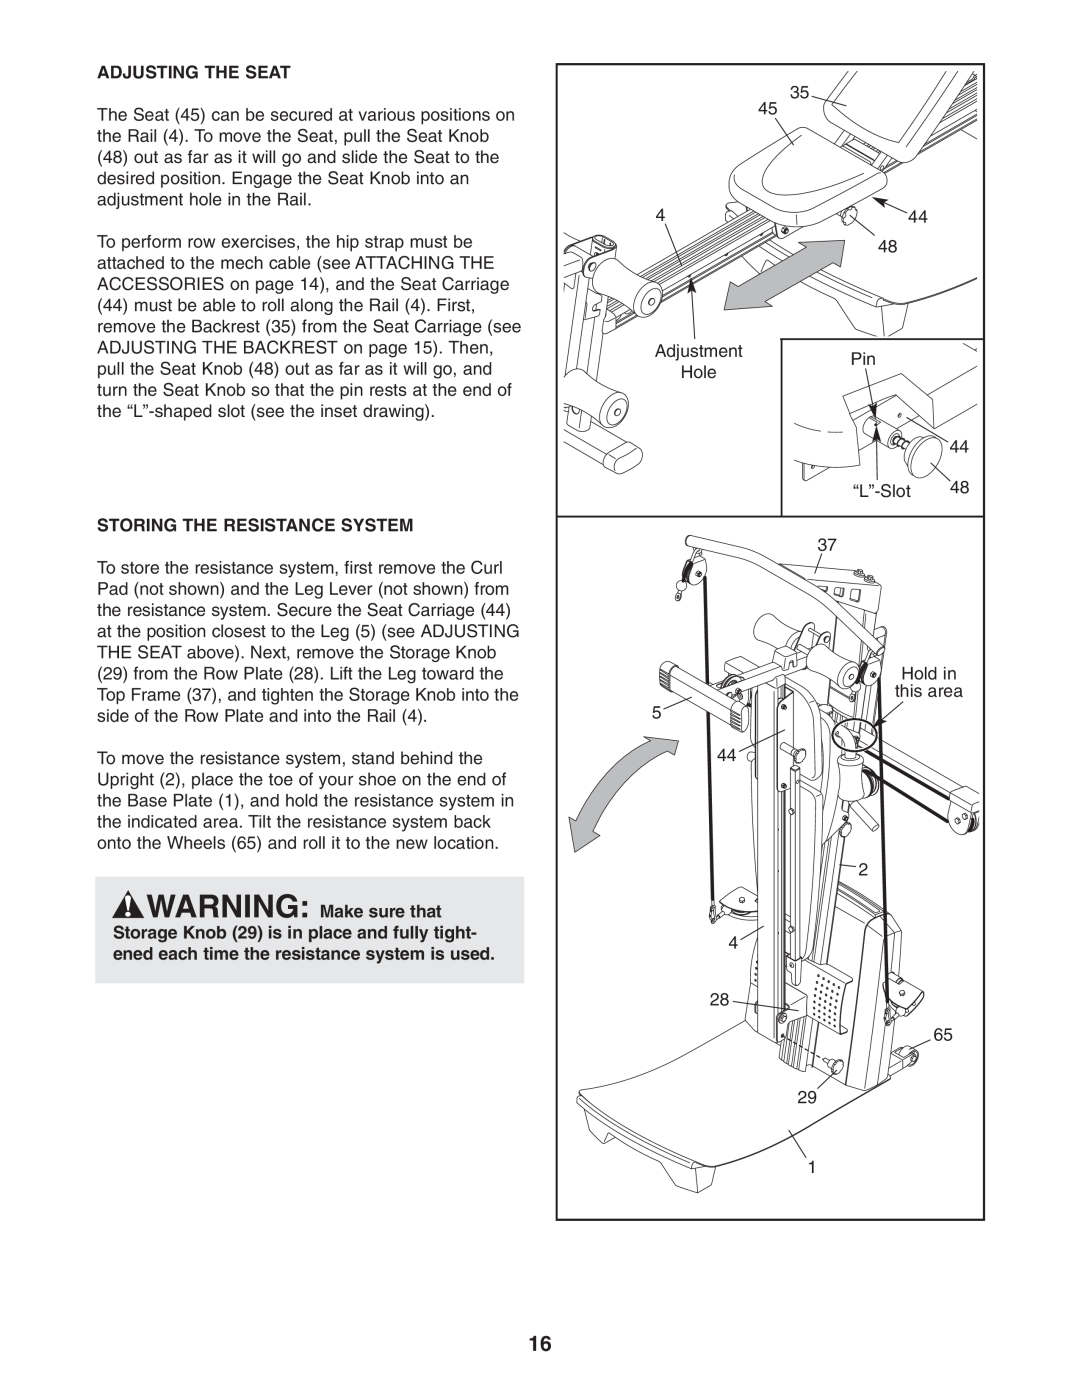 Weider WESY78734 user manual Adjusting The Seat, Storing The Resistance System 